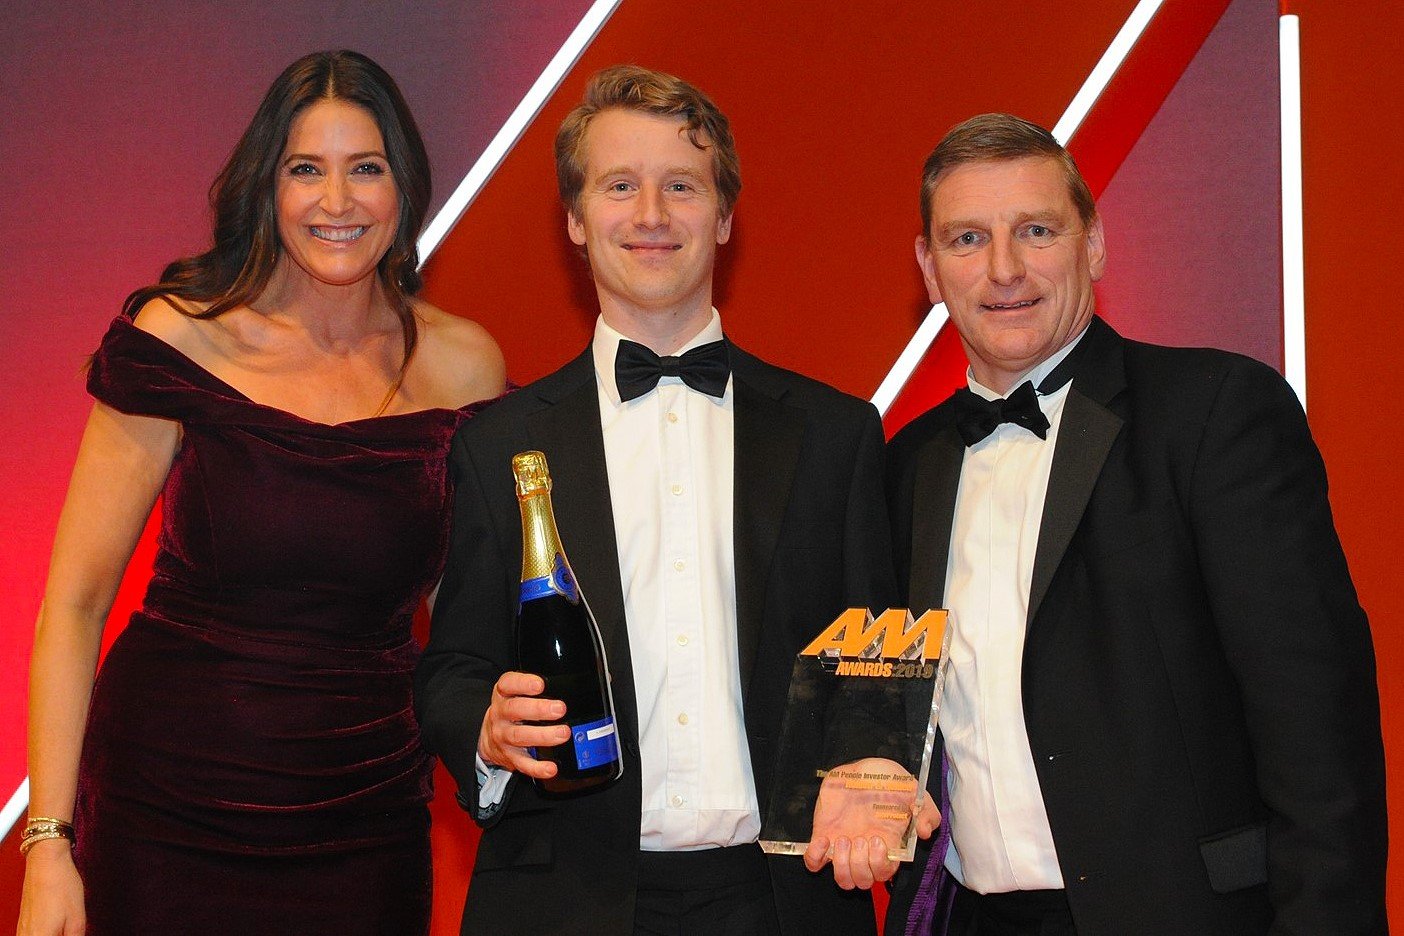 Tim Holden, chief executive,  Holden & Holden, accepts the  award from Michael McVeigh, chief operating officer, AutoProtect, right, and host Lisa Snowdon, left